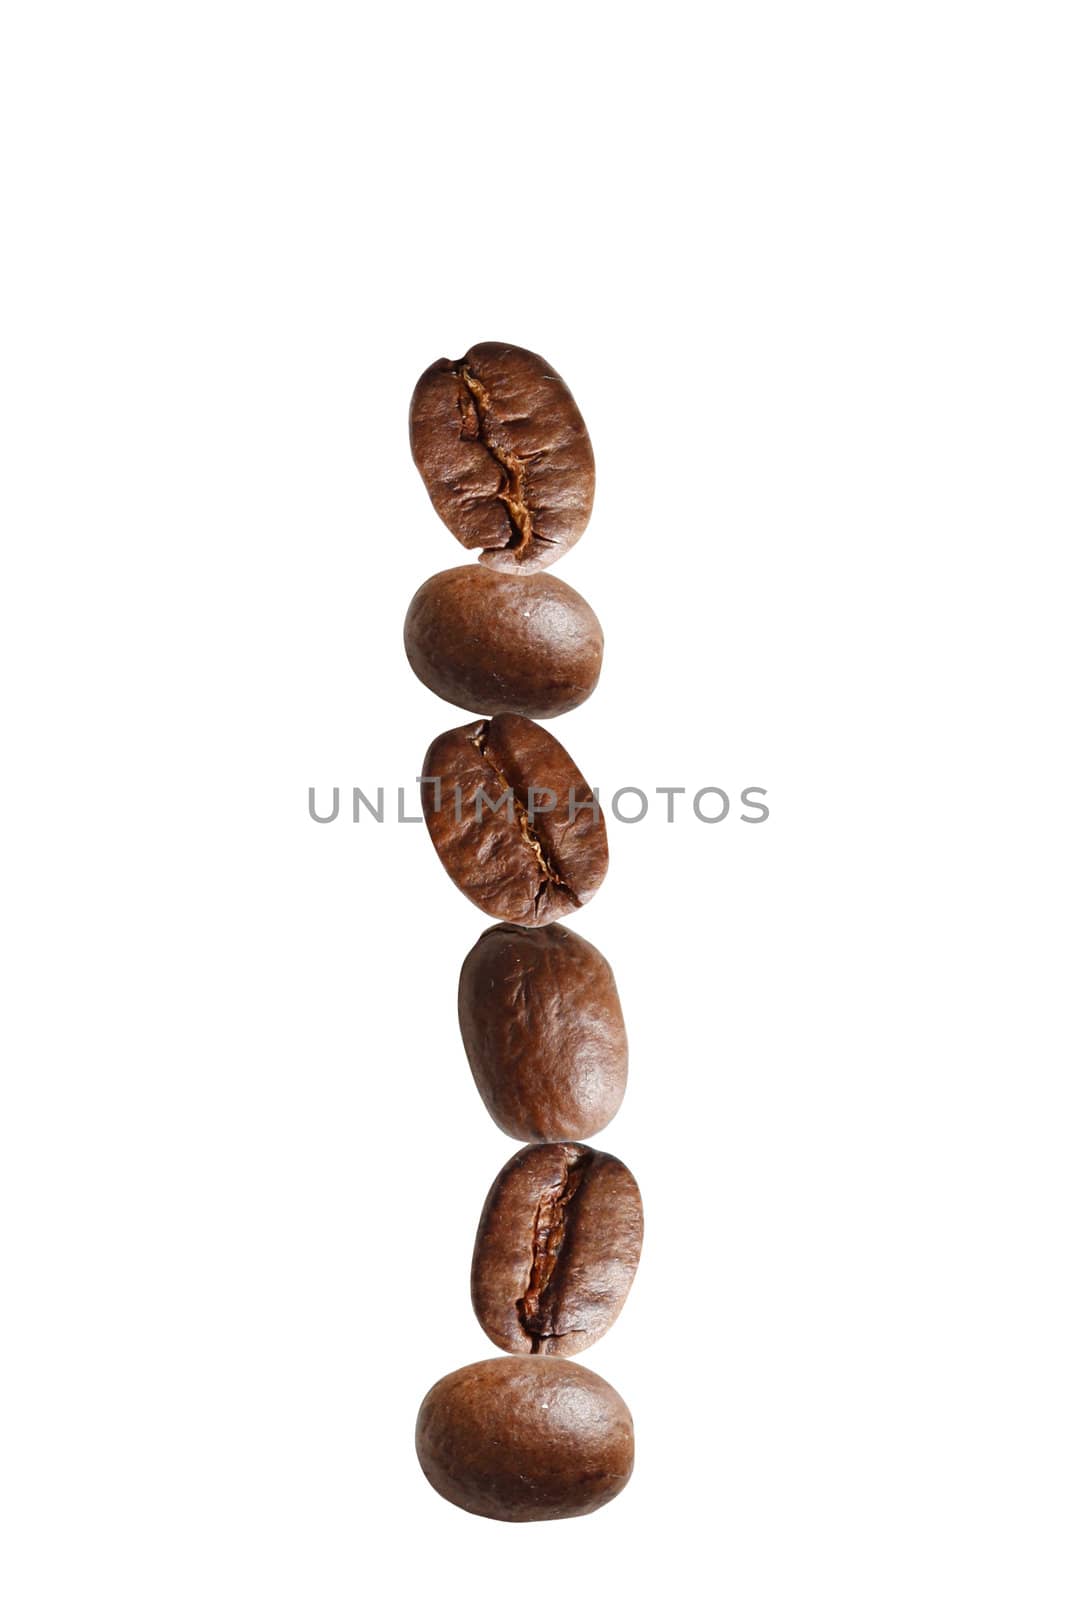 Coffee beans in a stack